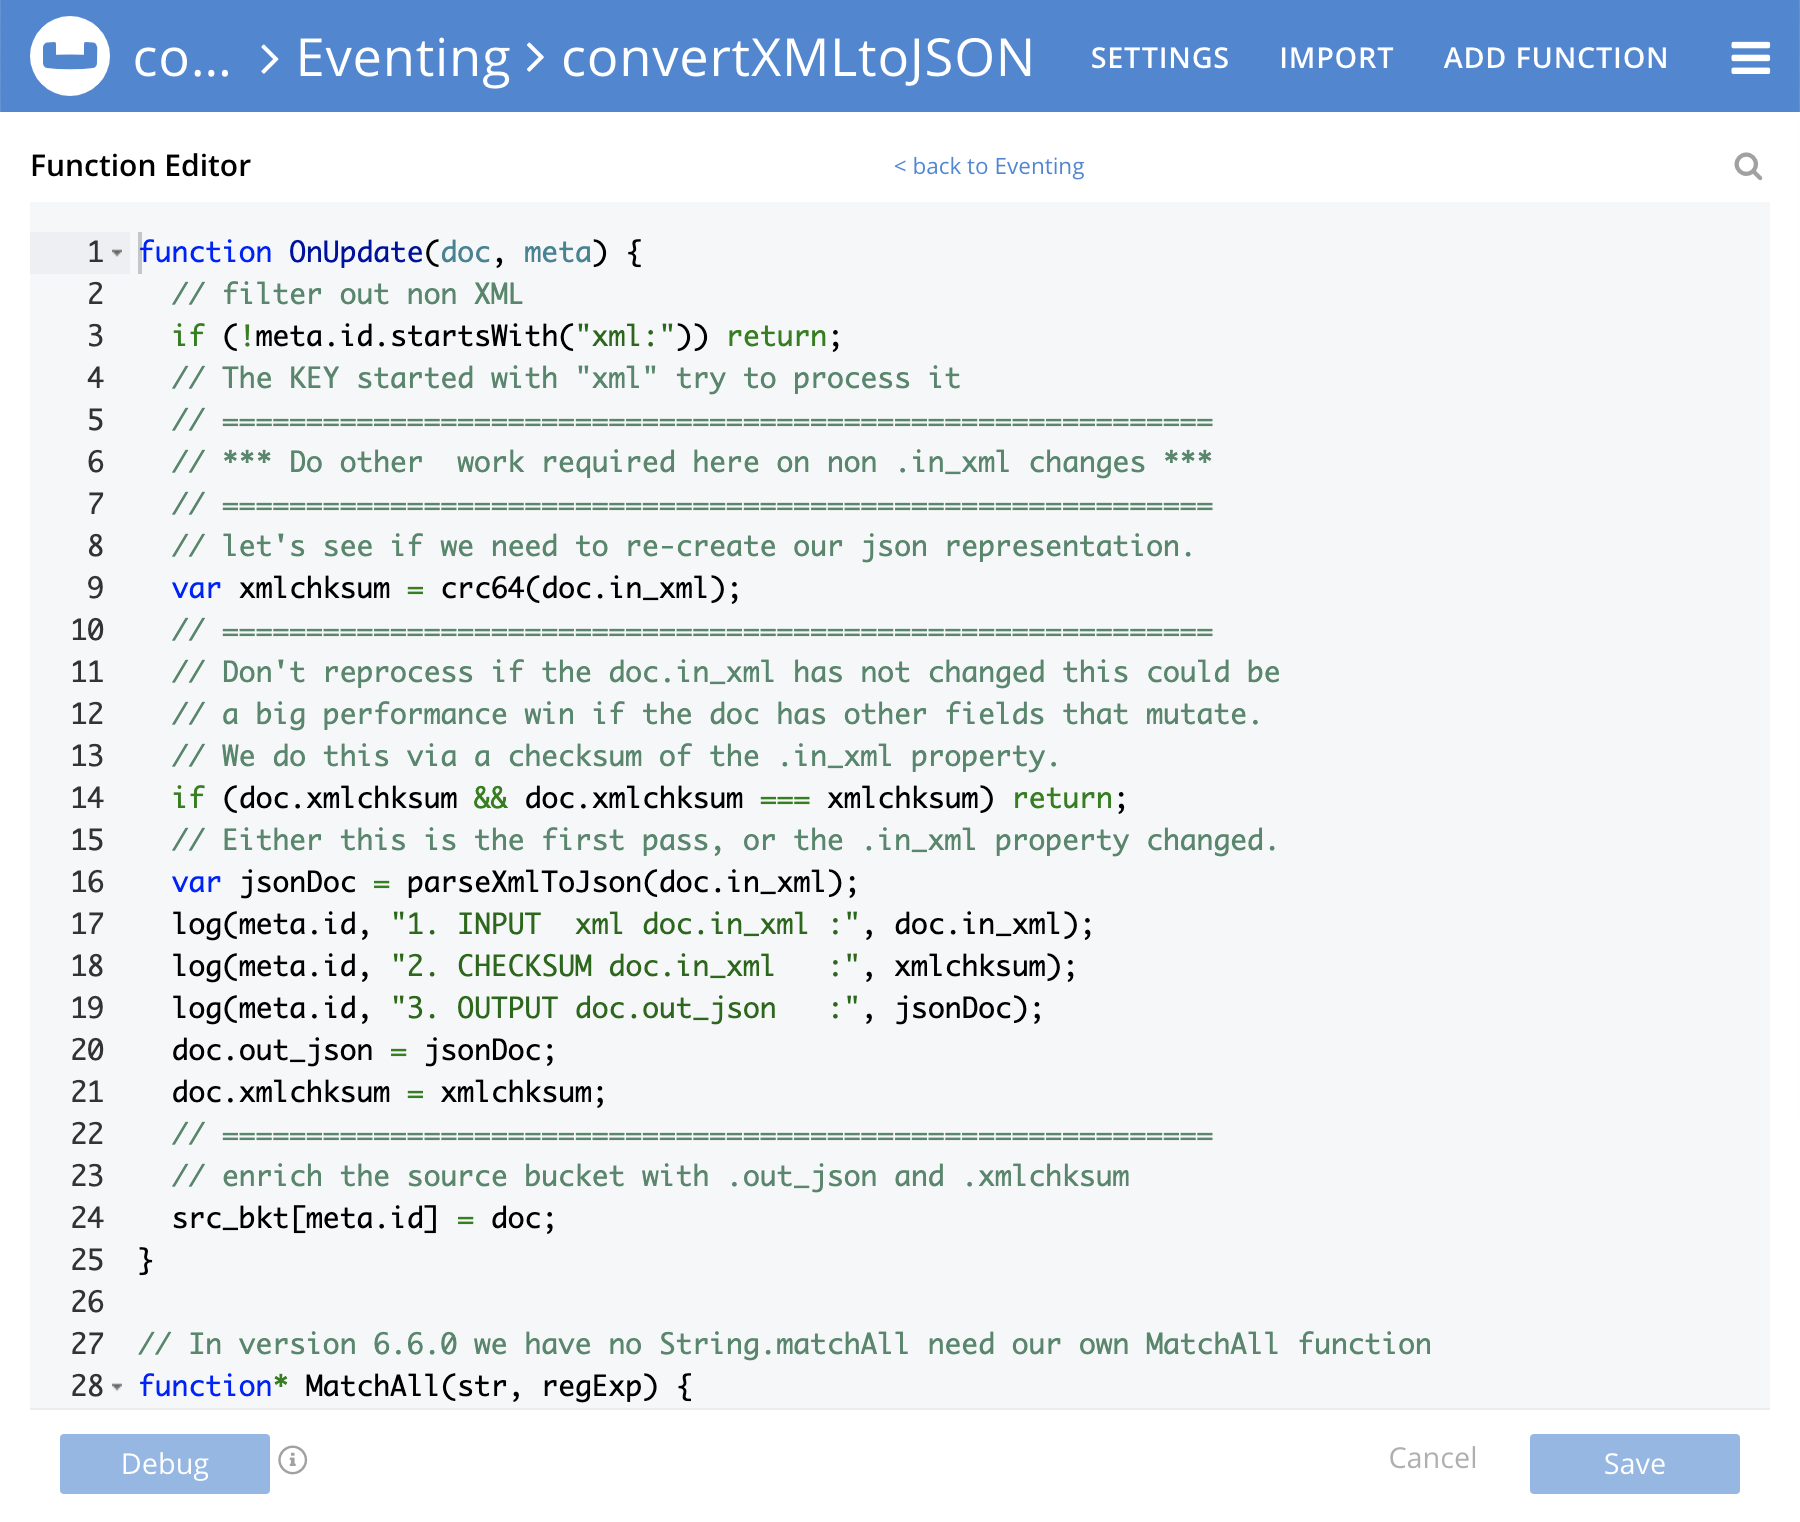 The function editor in Couchbase Eventing